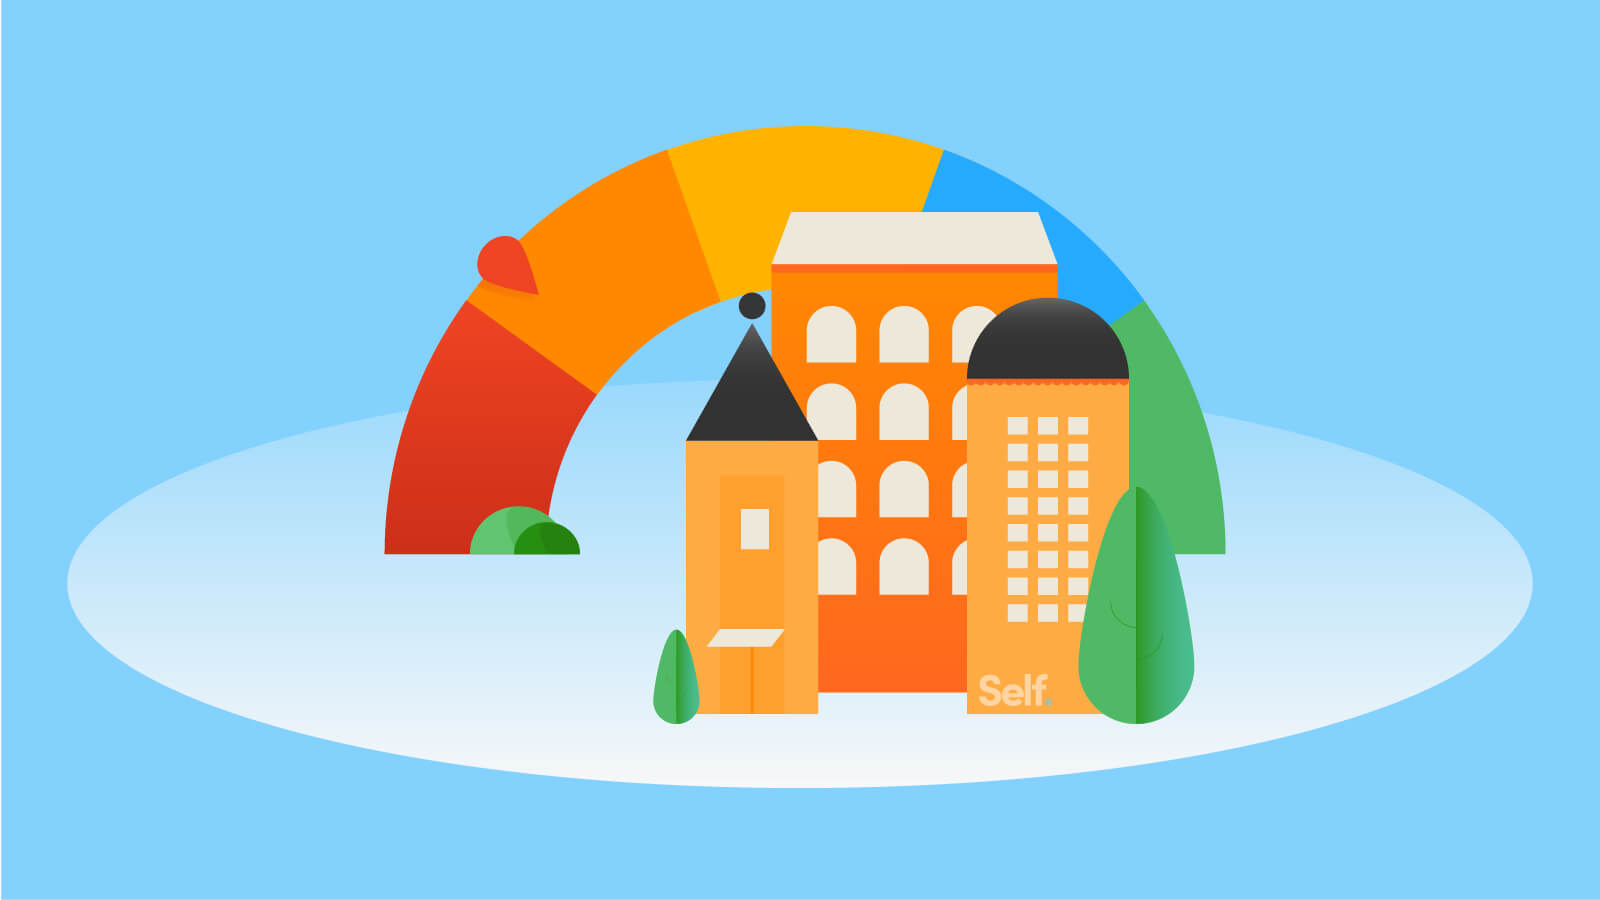 A colorful illustration of a credit score range arch with apartment buildings in the foreground.